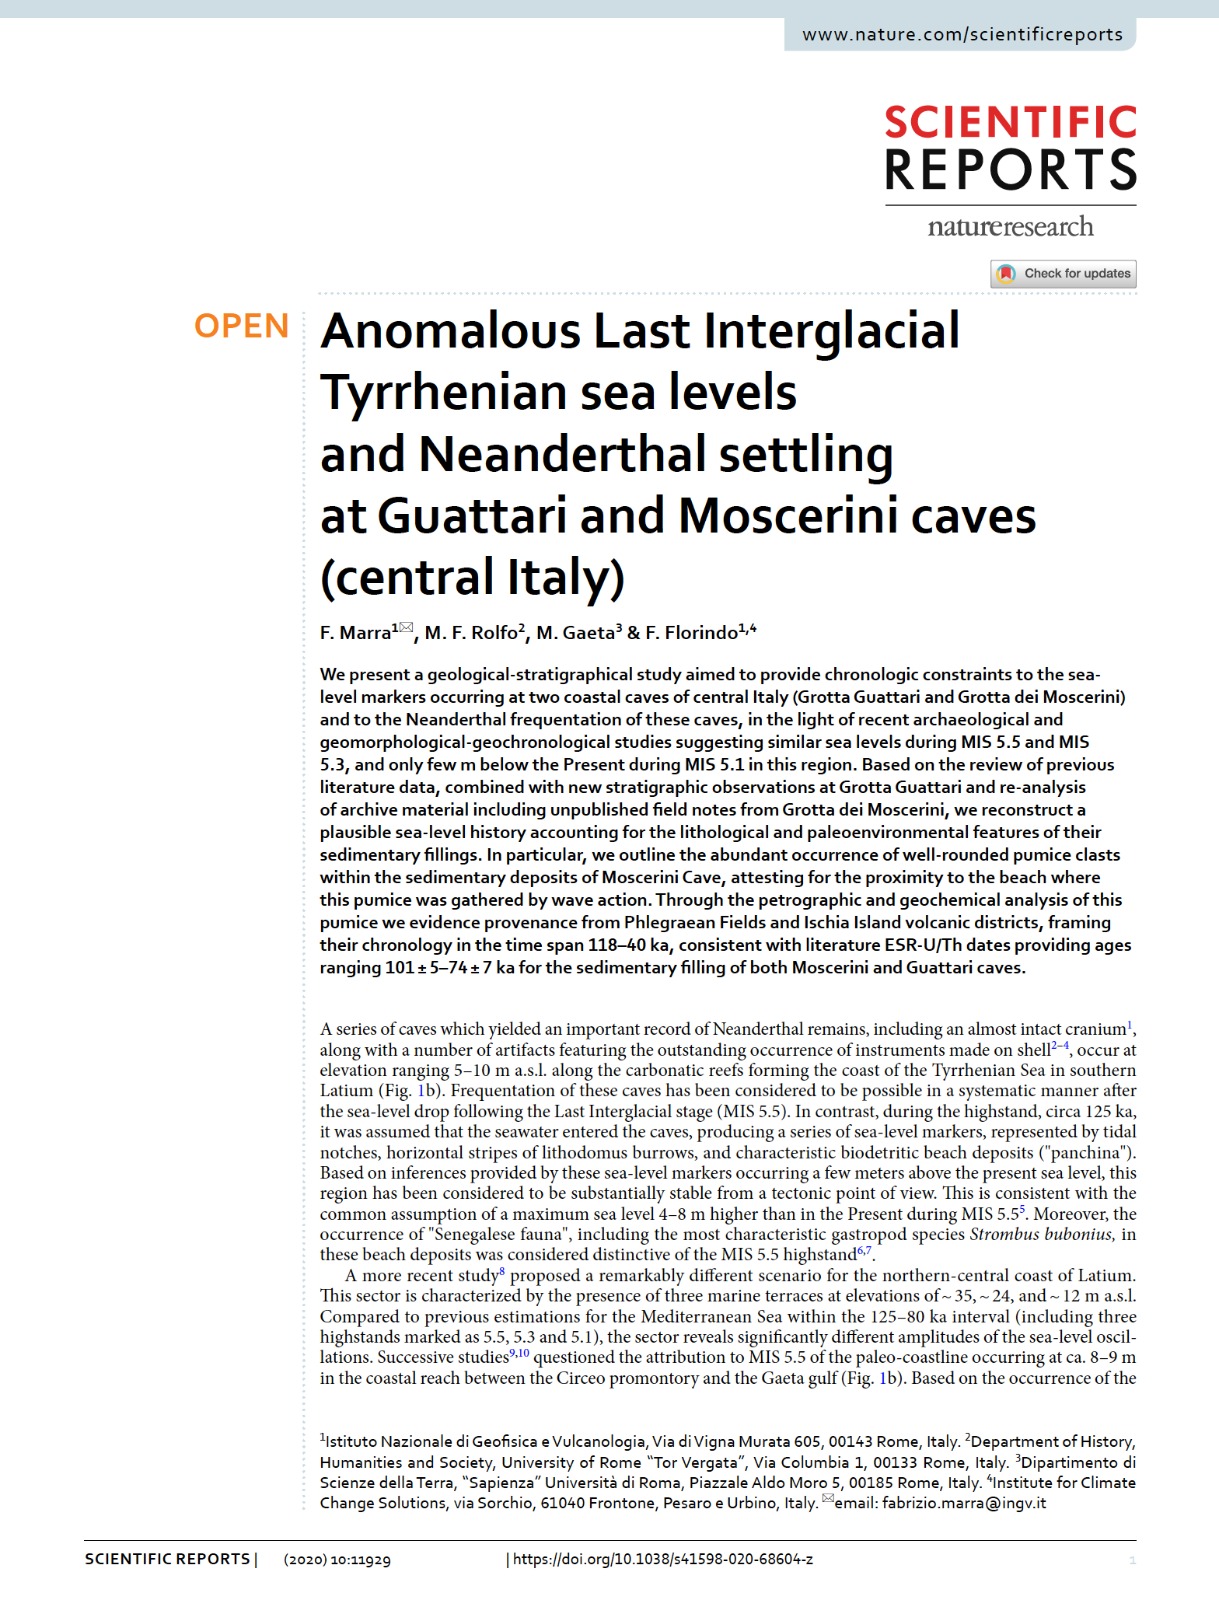 Anomalous Last Interglacial Tyrrhenian sea levels and Neanderthal settling at Guattari and Moscerini caves (central Italy)